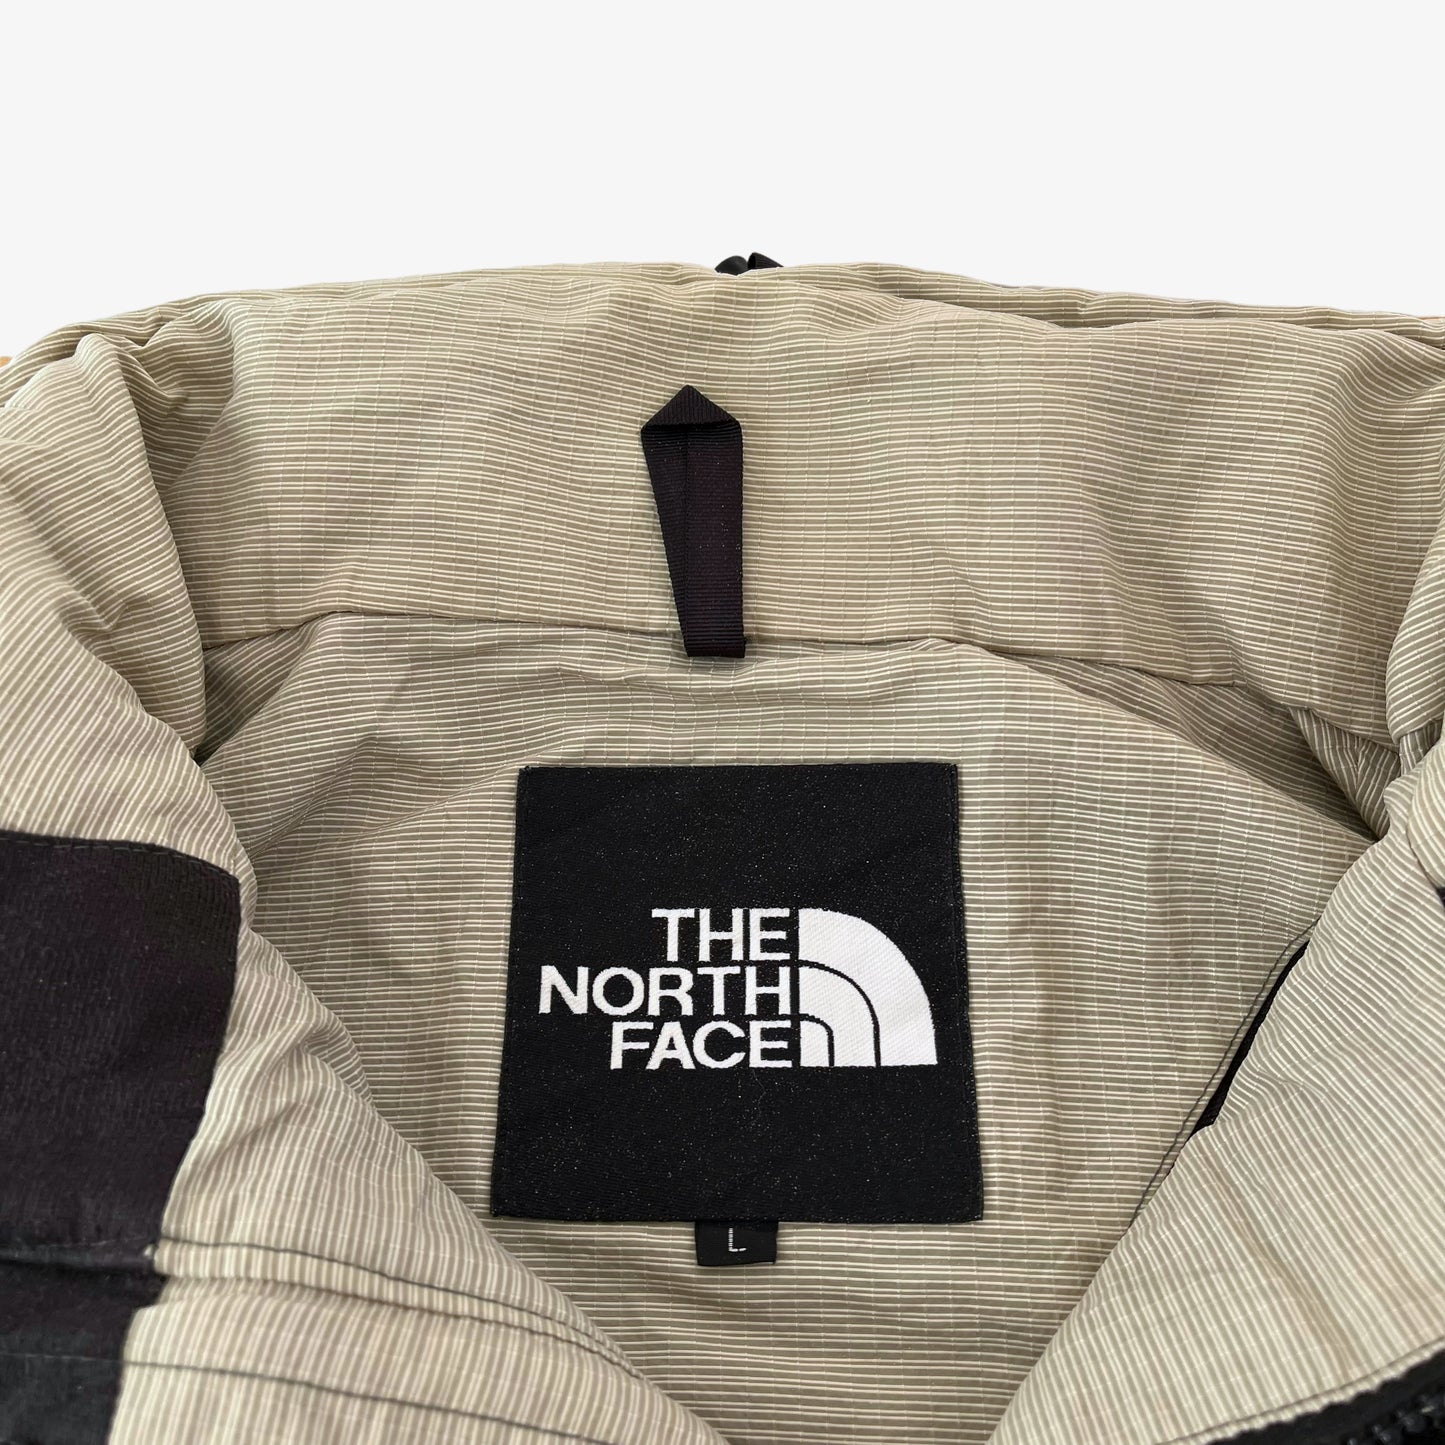 Vintage 90s The North Face Utility Jacket With Fold Away Hood Label - Casspios Dream